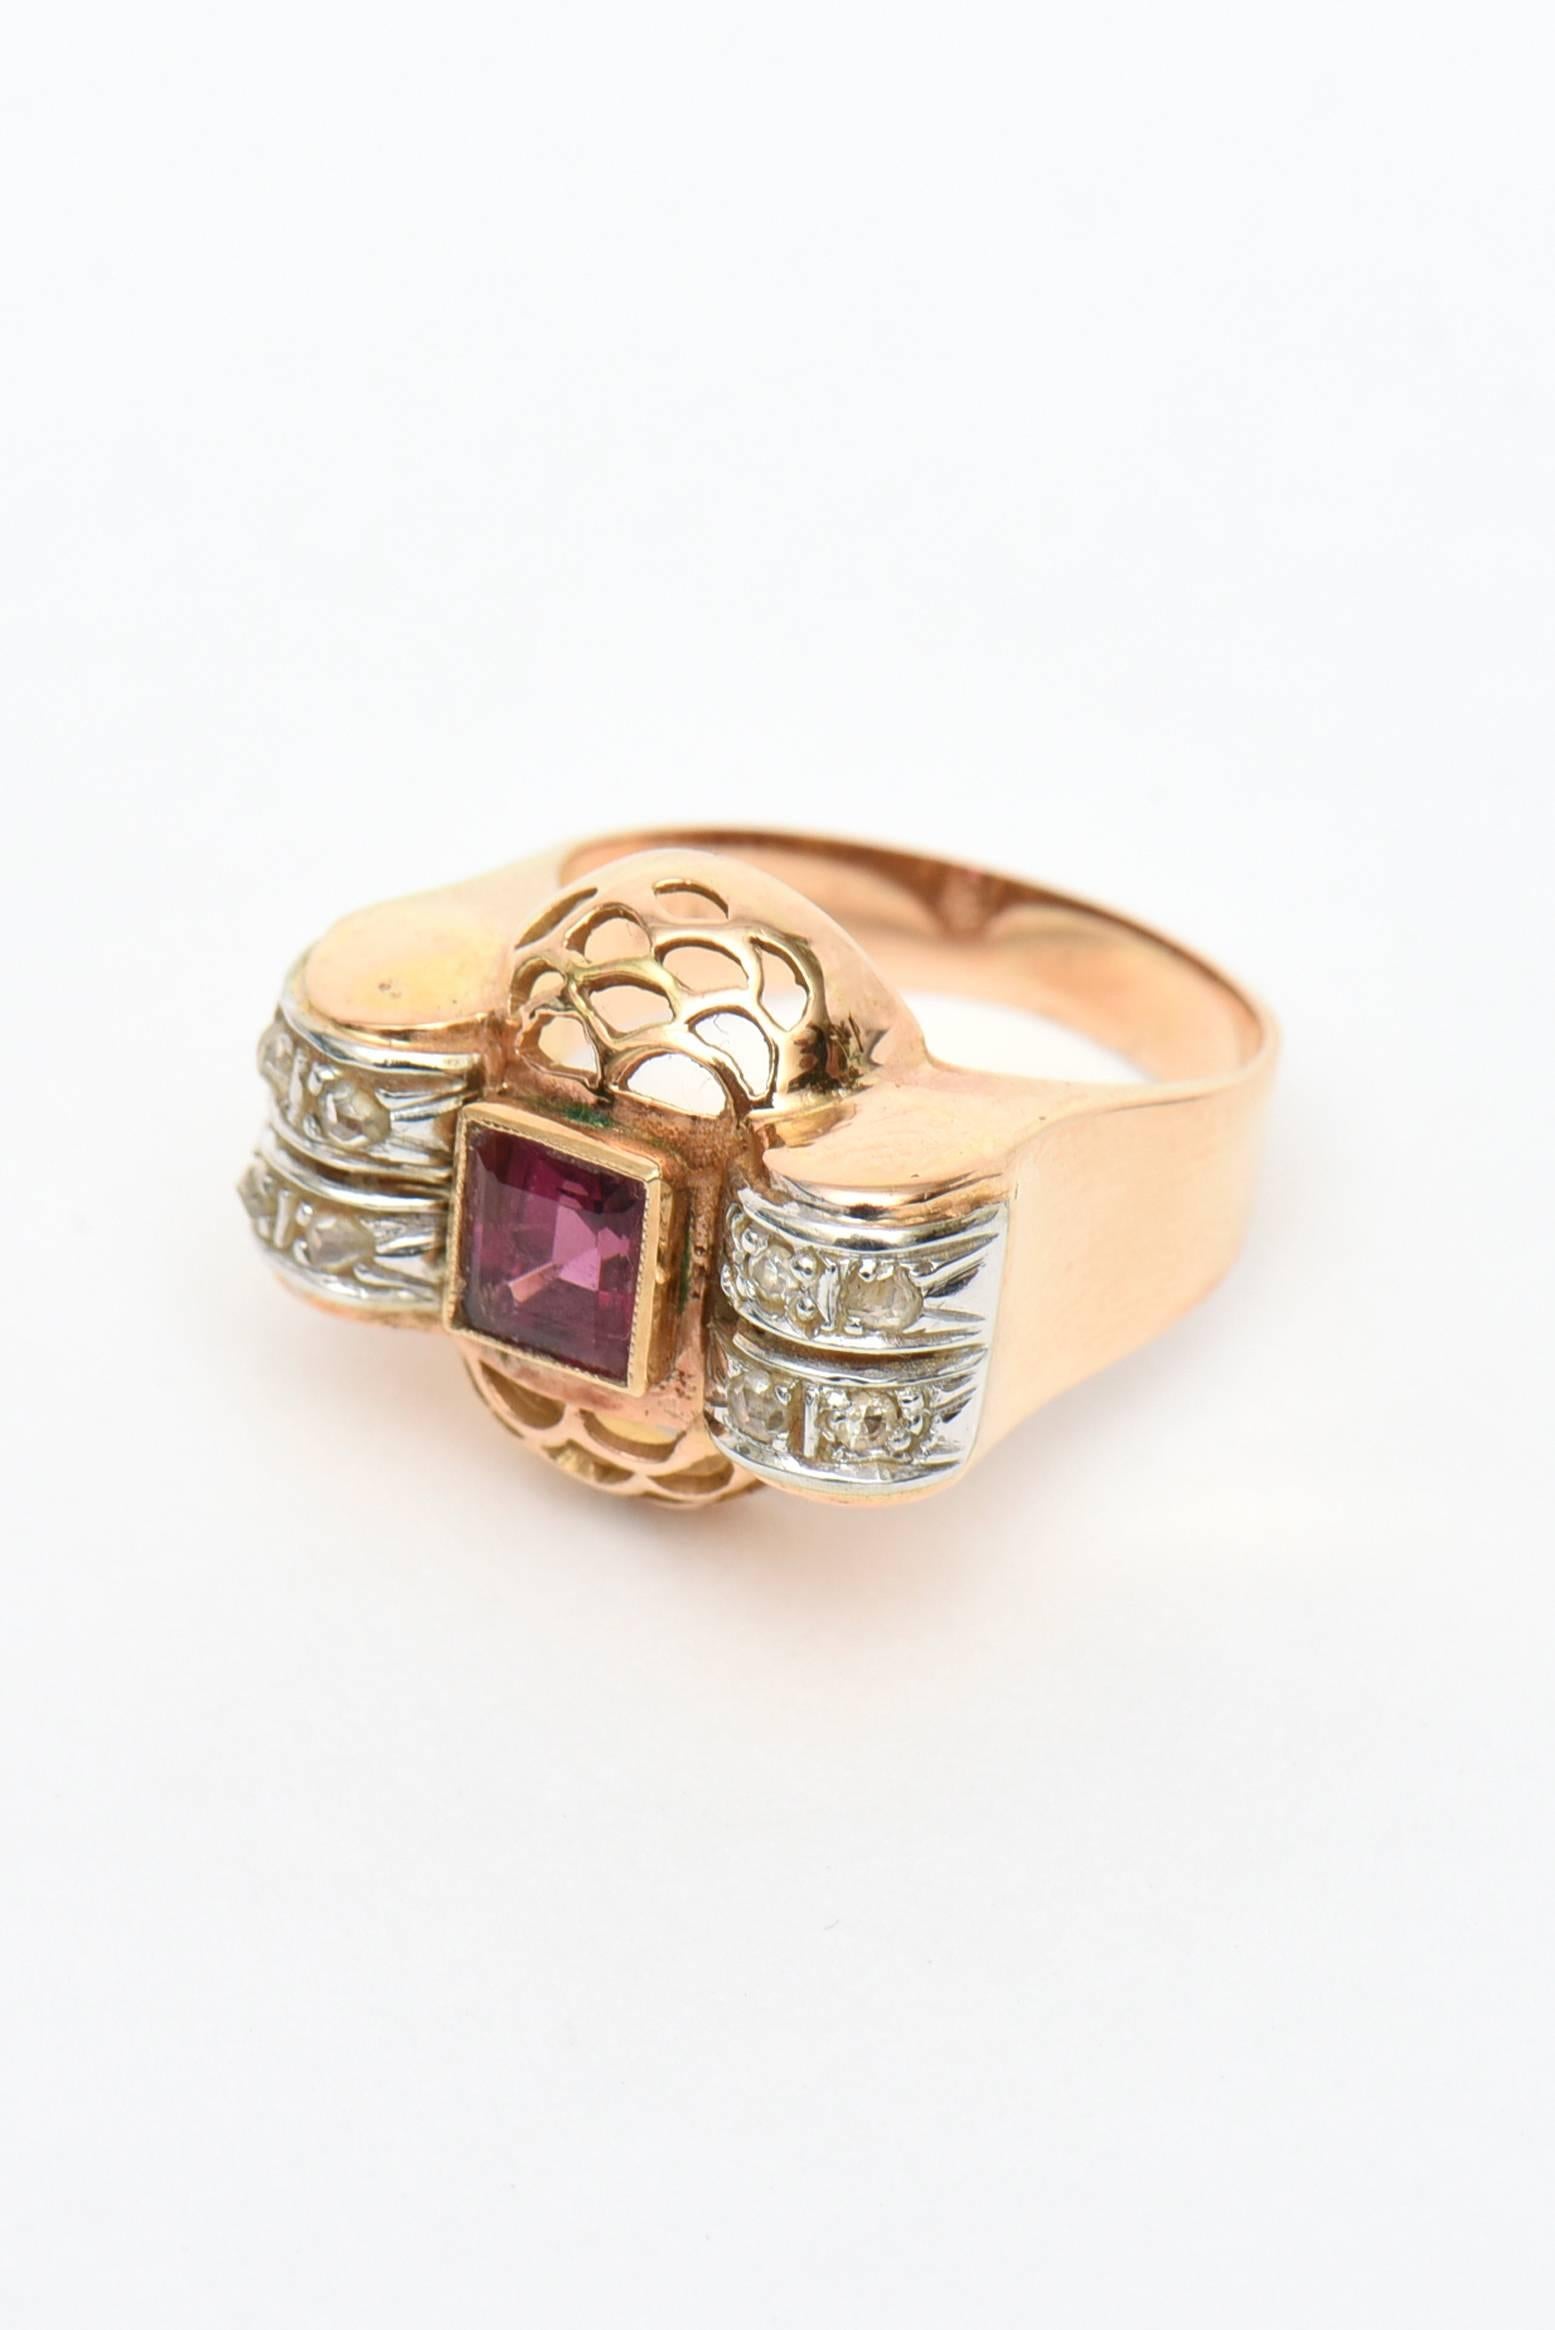 This lovely retro 14 K rose gold ring has scalloped edges housing the square cut rubelite that is surrounded by 4 rose cut diamonds. Rubelite is a form of tourmaline and is a semi precious stone. It is from the 1940's. Elegant and a forever ring.